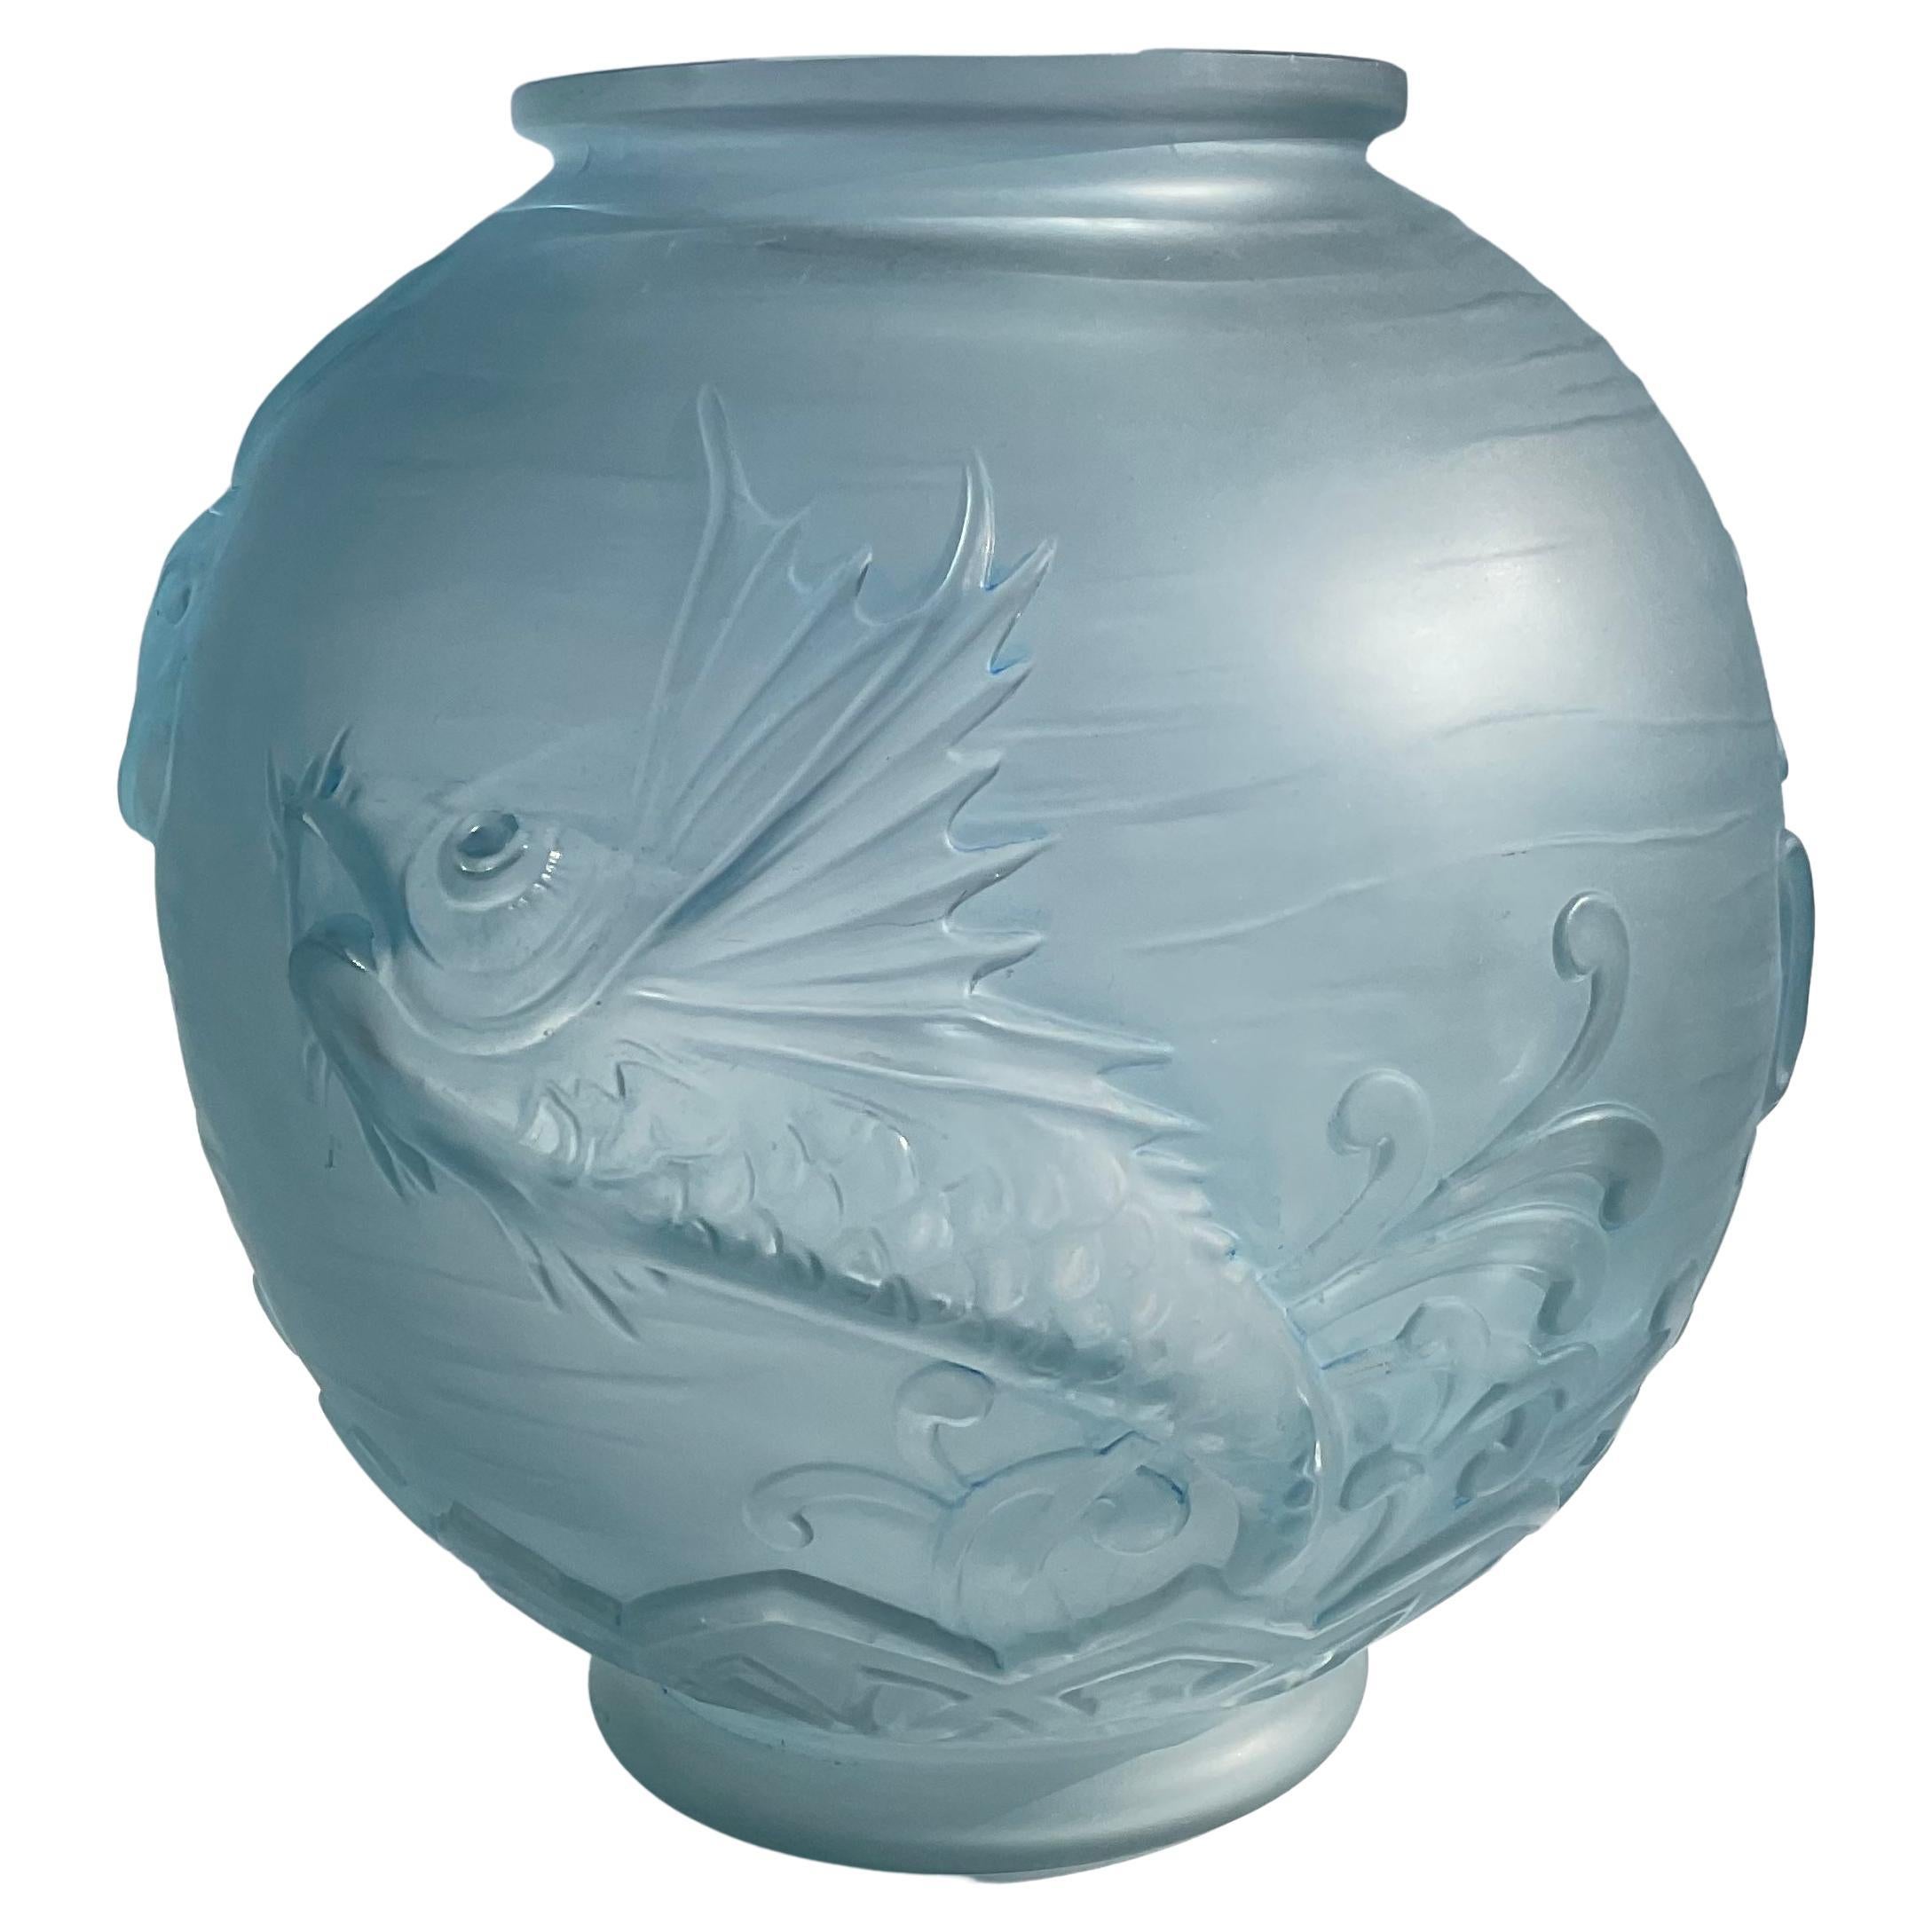 Large Pierre D’avesn Large French Art Deco Flying Fish Vase circa 1930s Blue For Sale